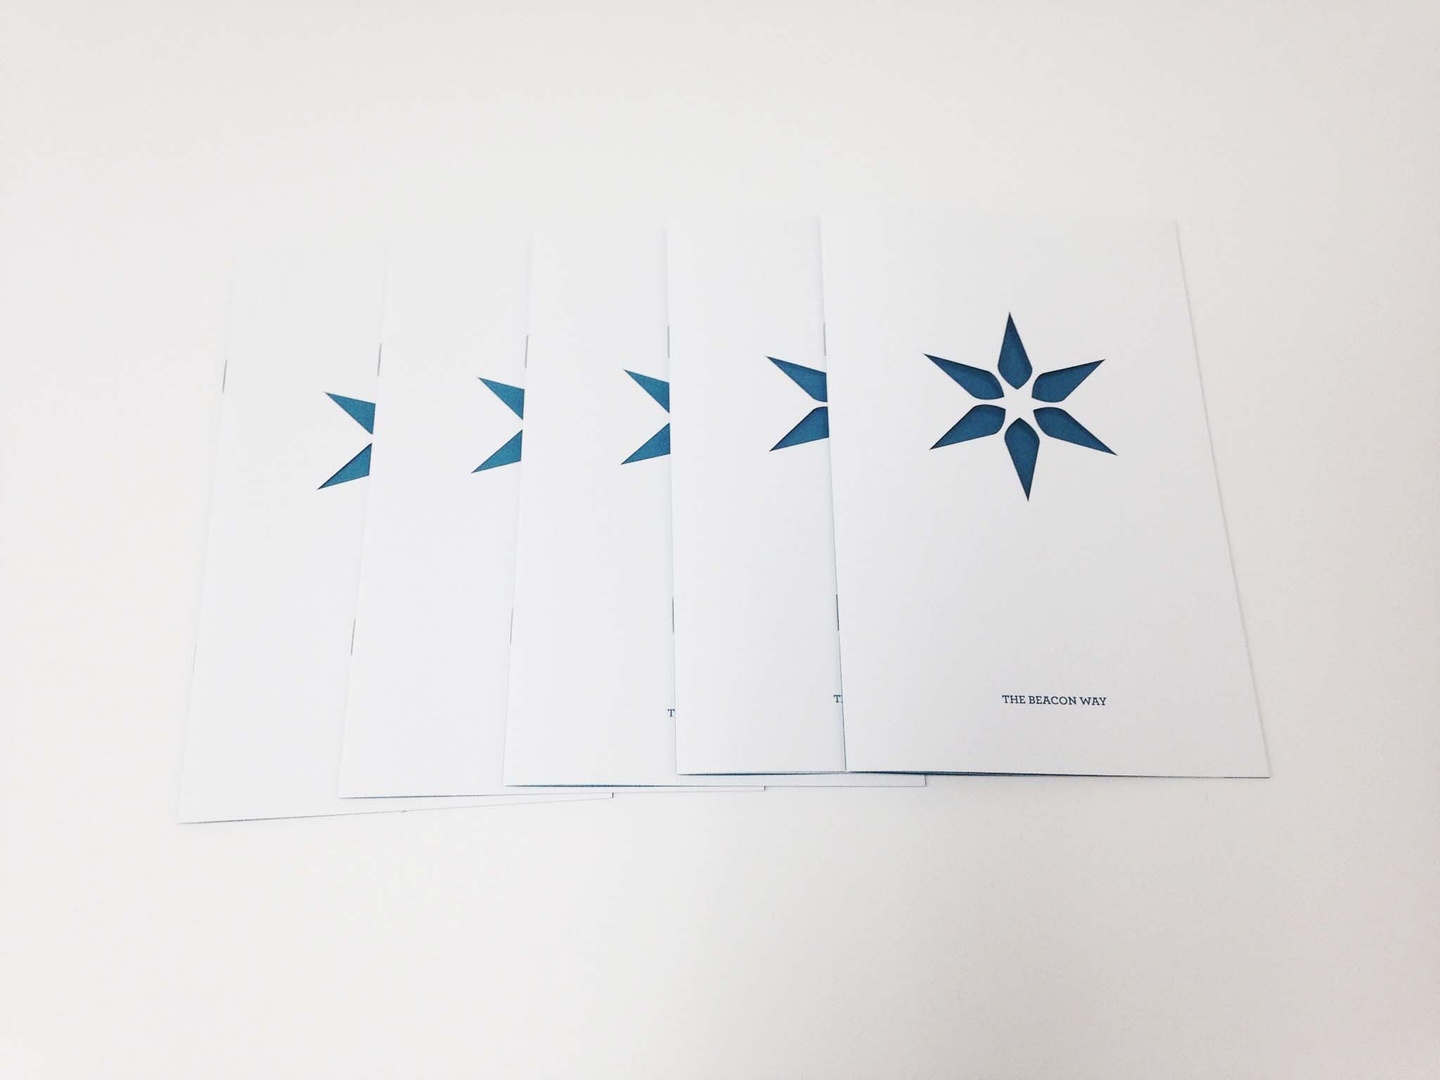 Spread out set of five white booklets, each with a blue six-pointed star-like design on the cover.